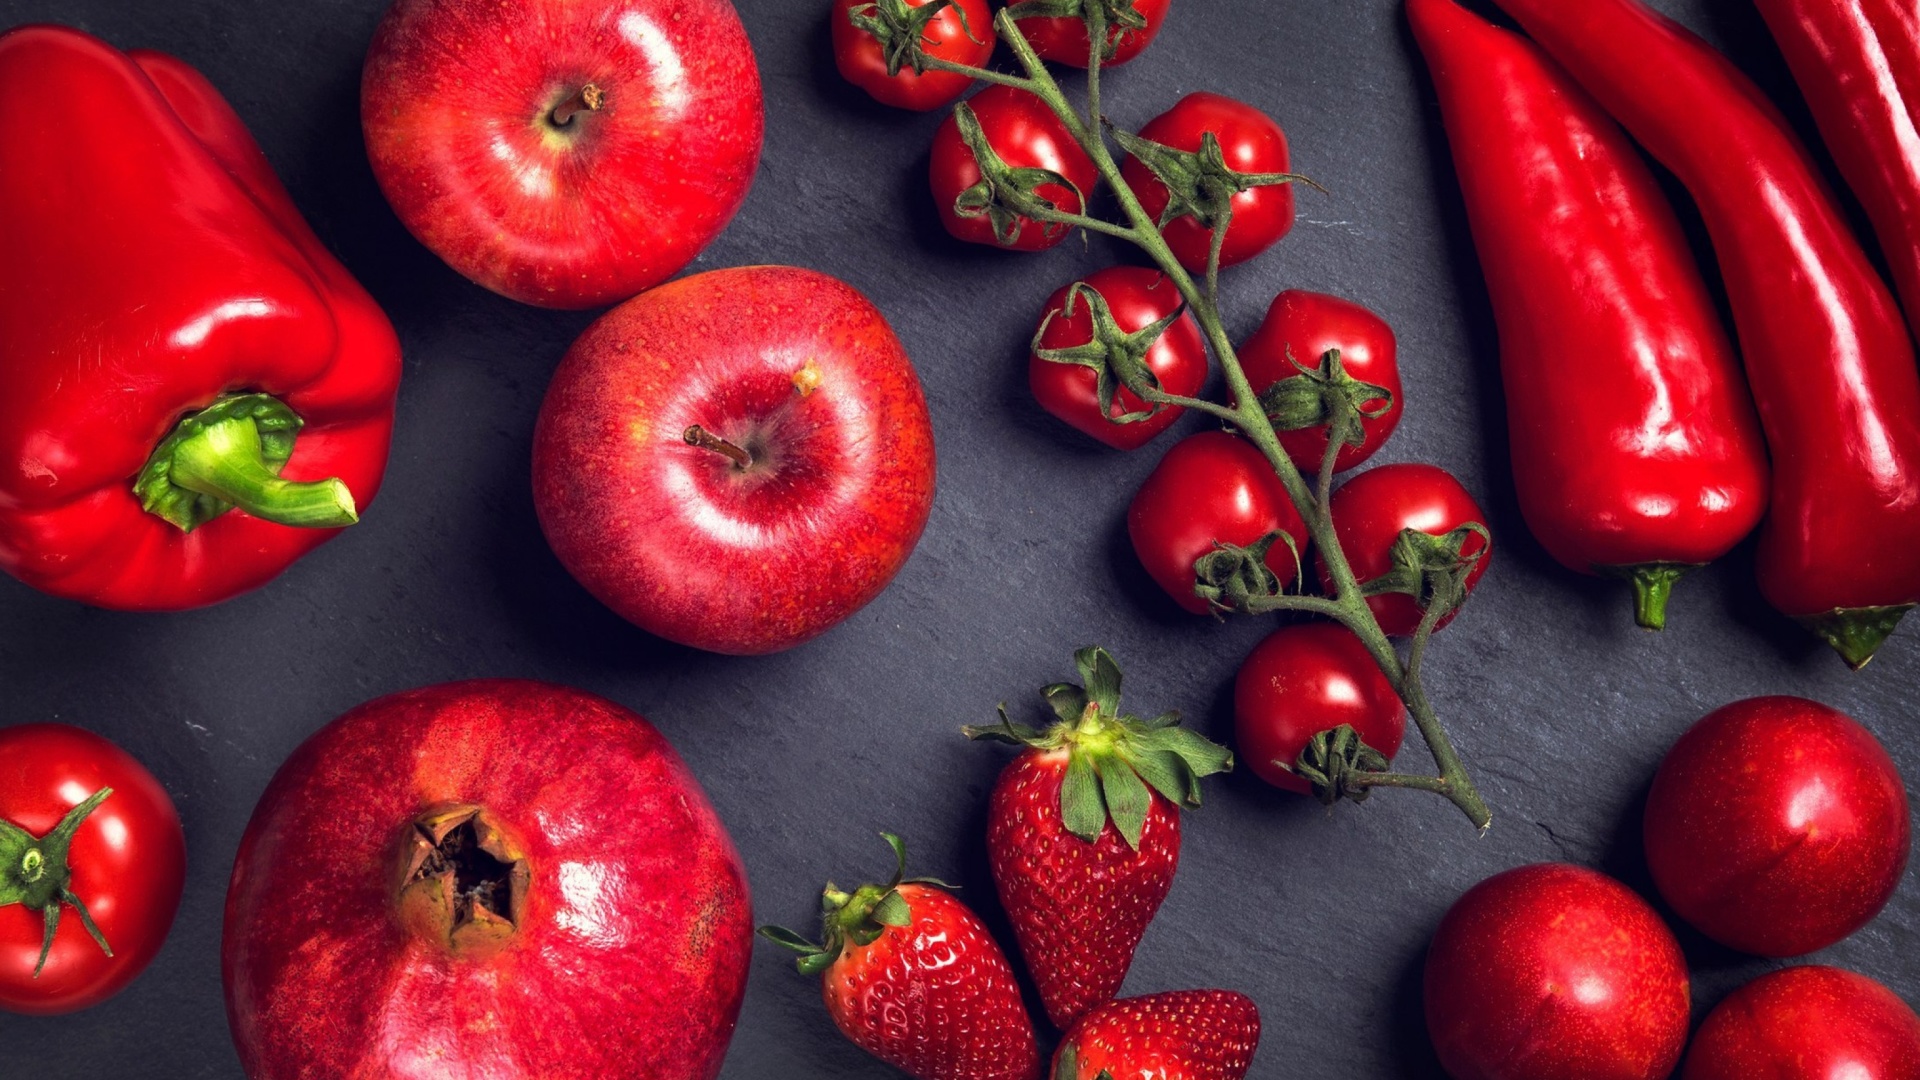 Sfondi Red fruits and vegetables 1920x1080